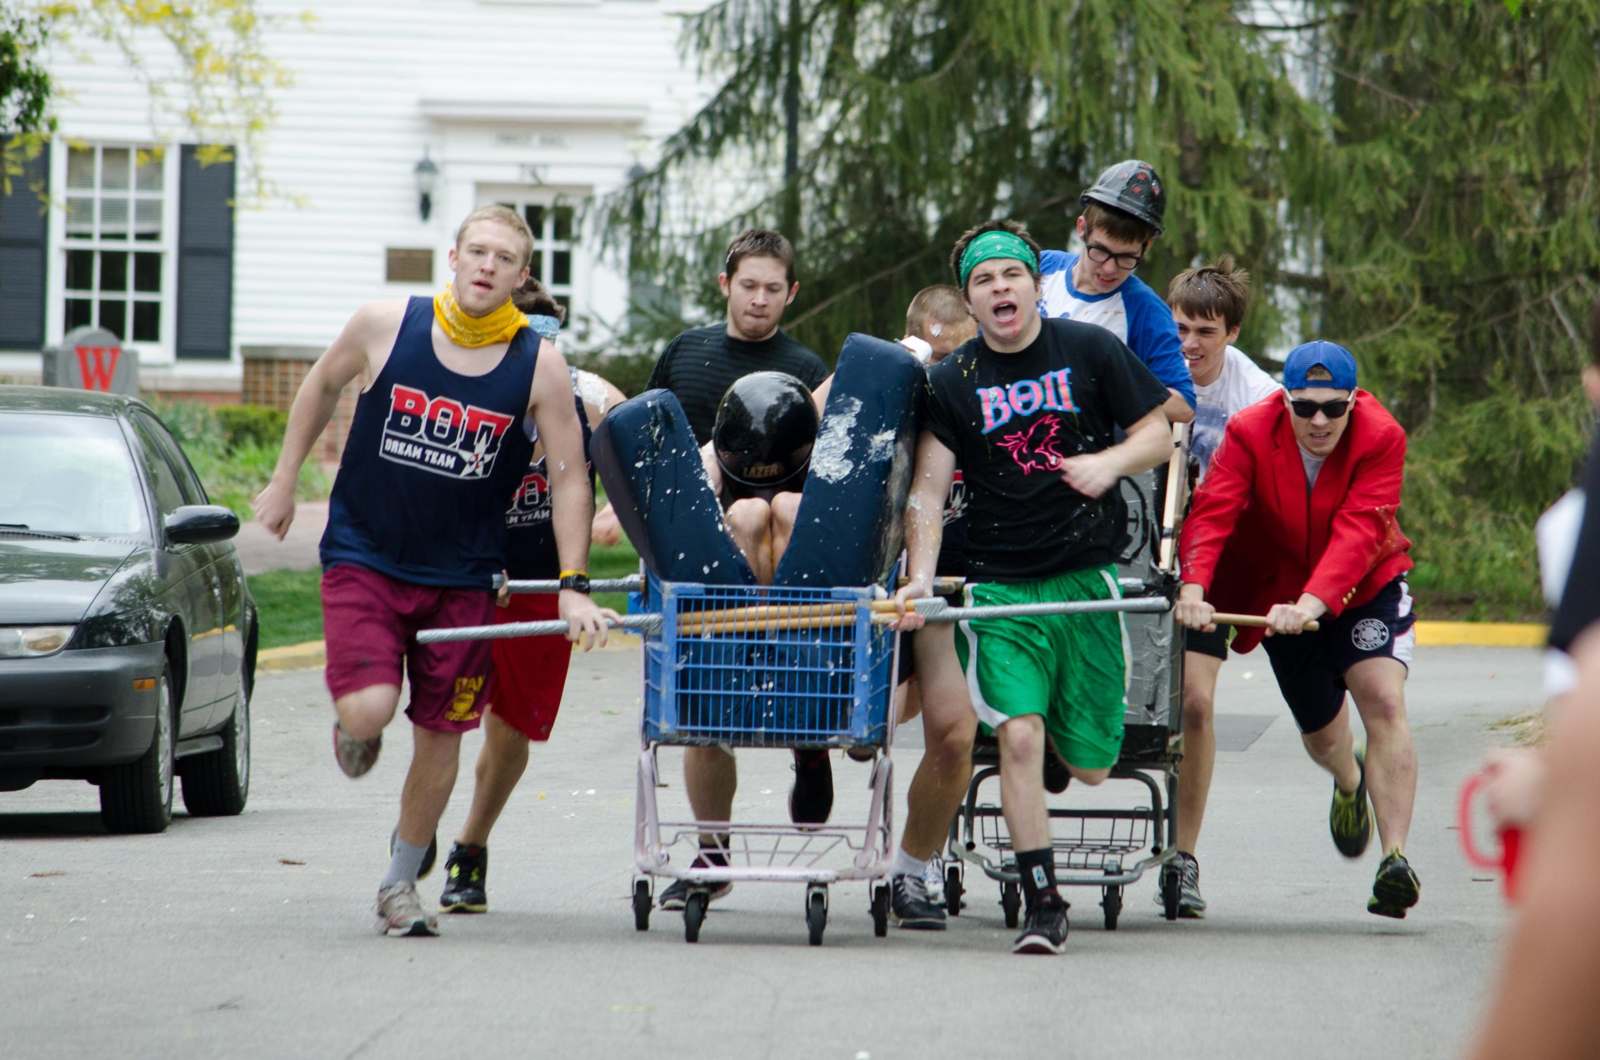 a group of people pushing a cart with a person in it